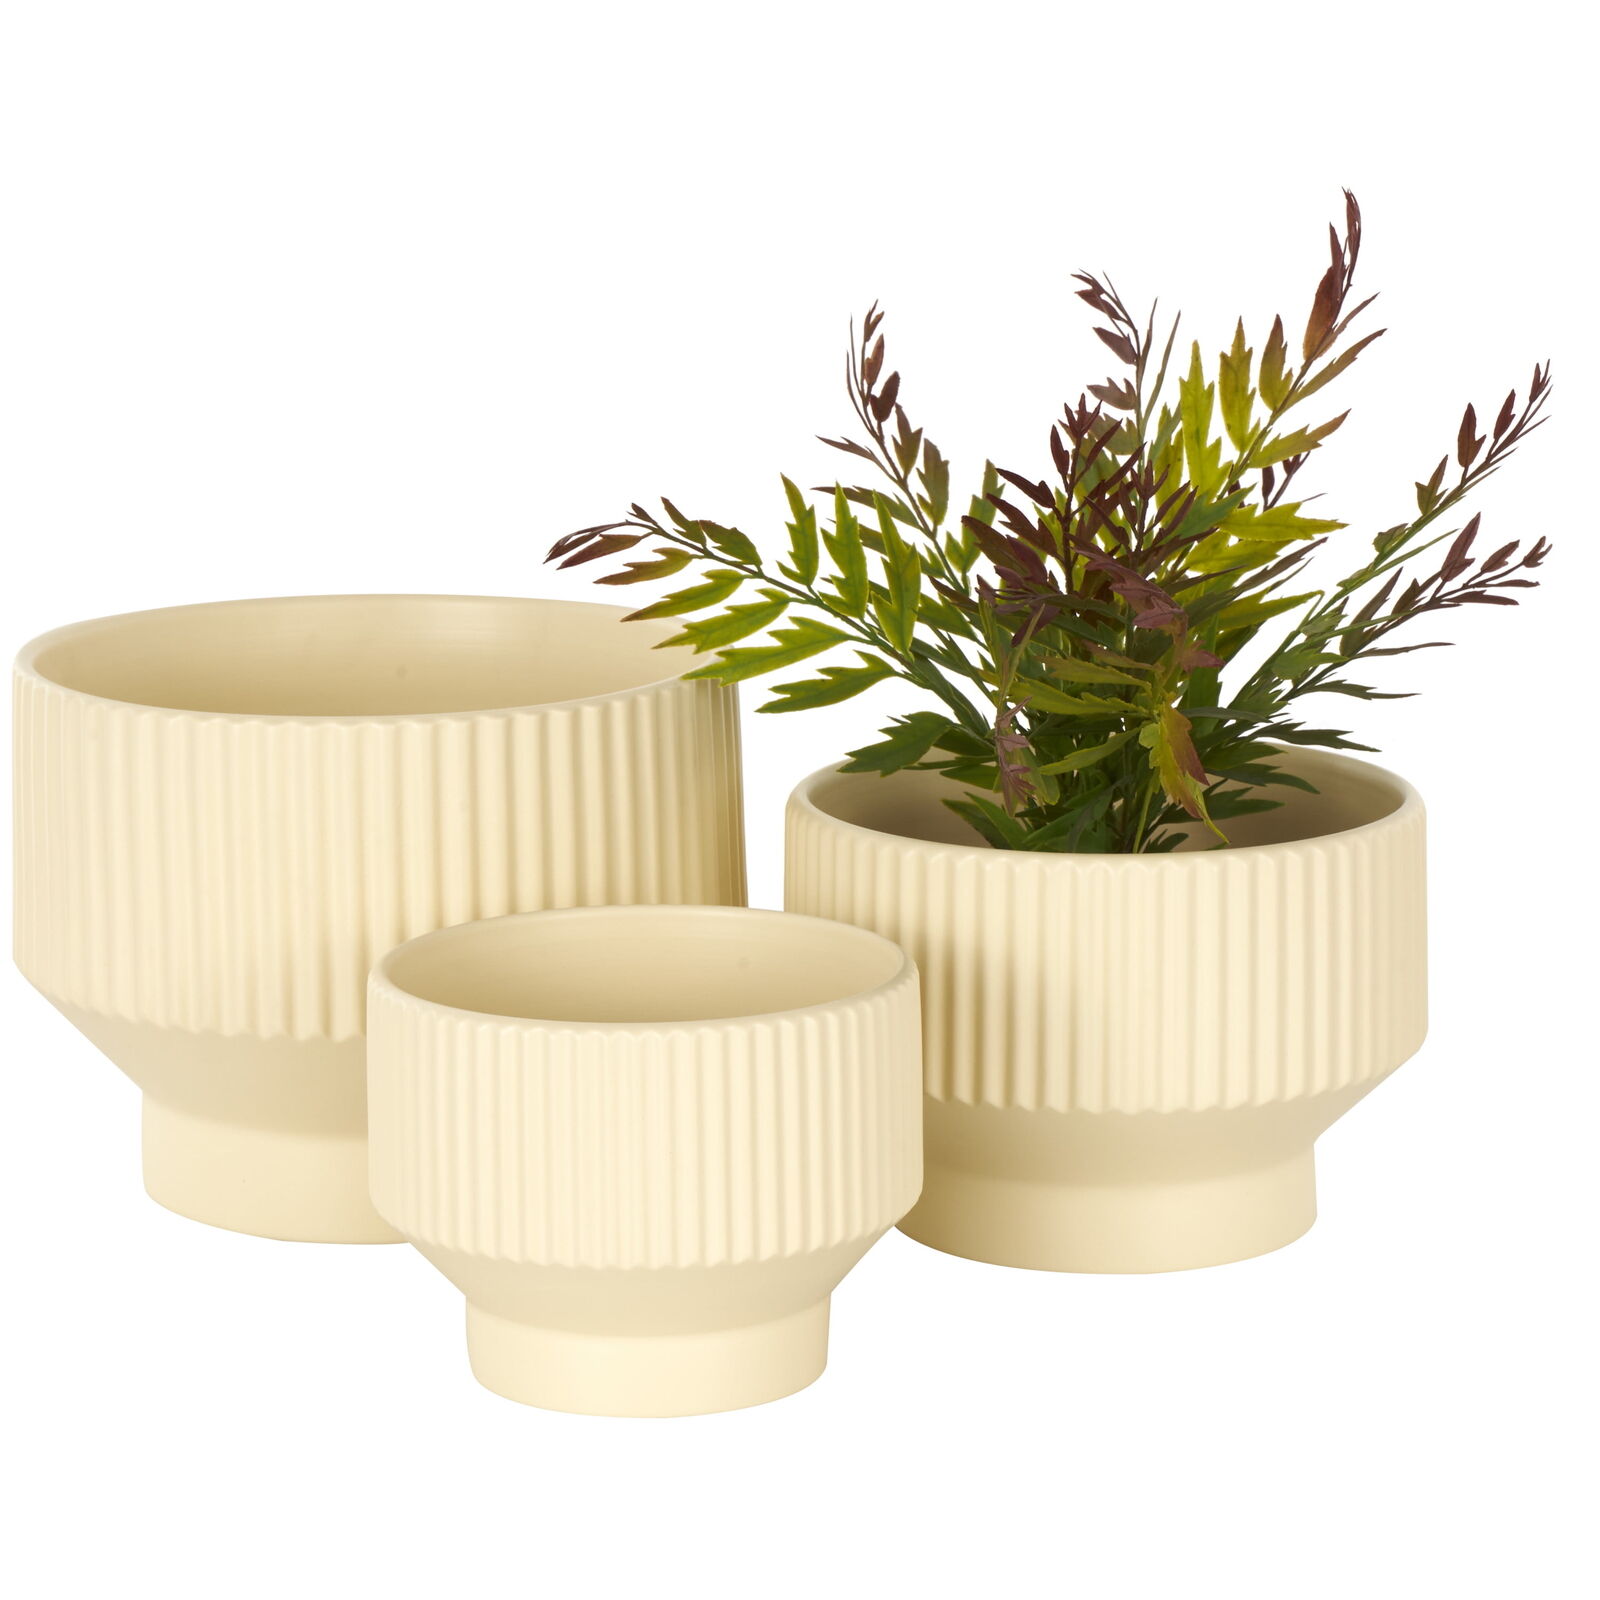 10", 8", 7"W Wide Cream Ceramic Planter with Linear Grooves and Tapered Bases Без бренда